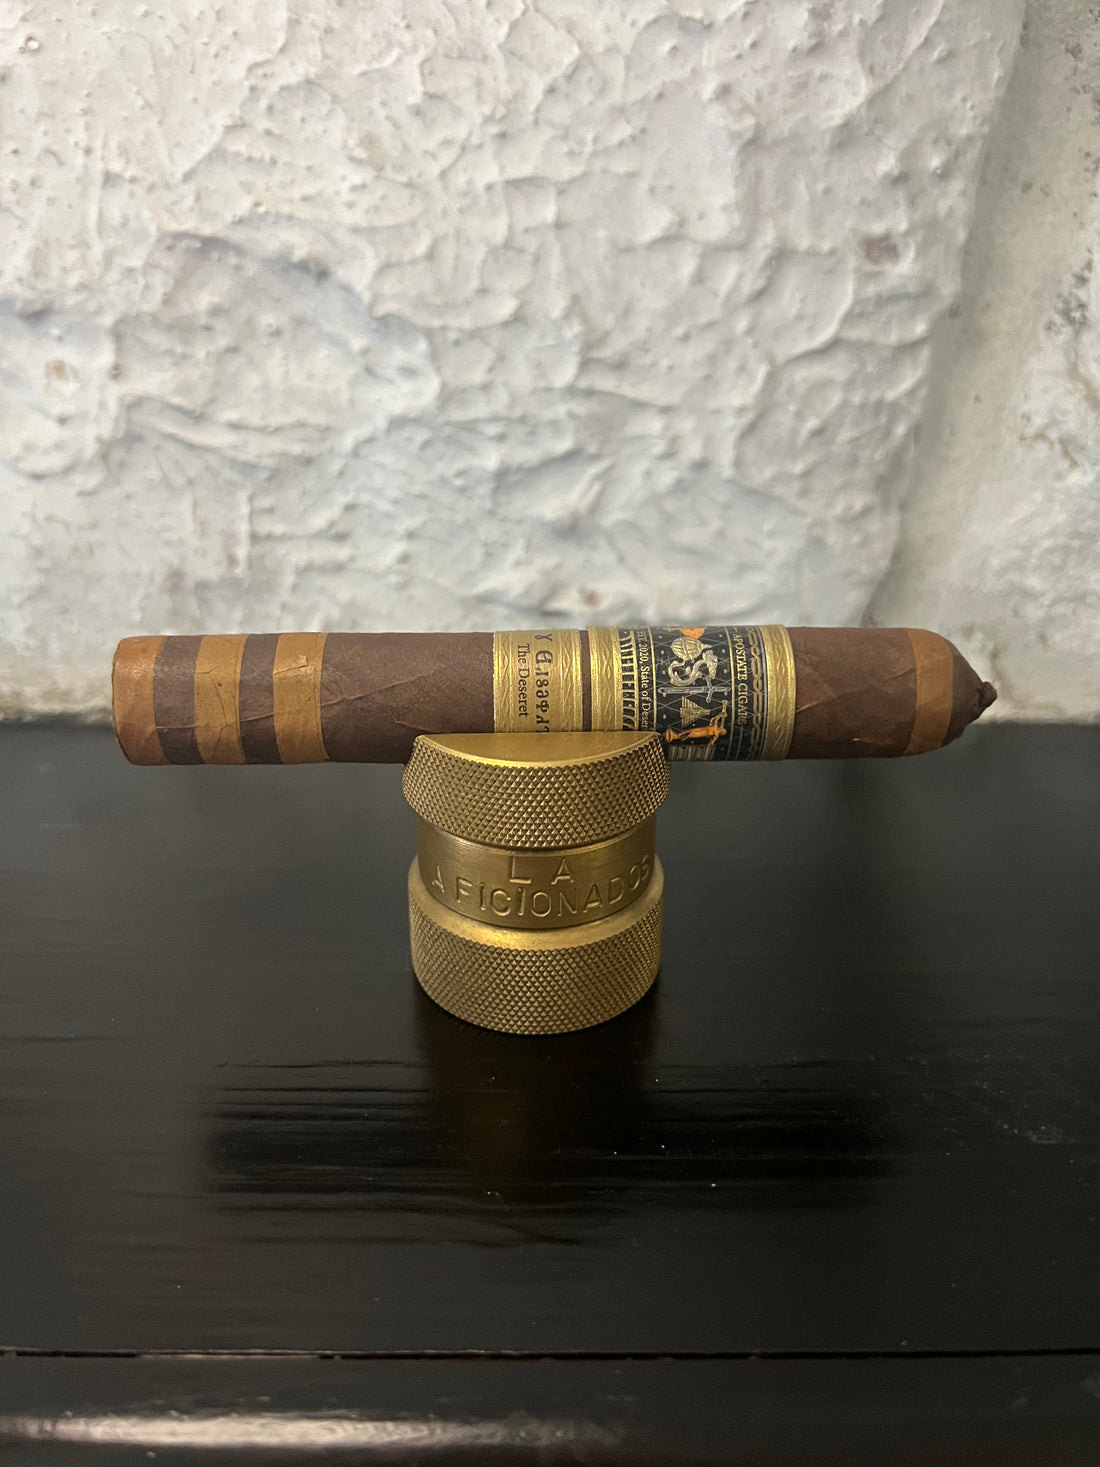 The Deseret by Apostate Cigars